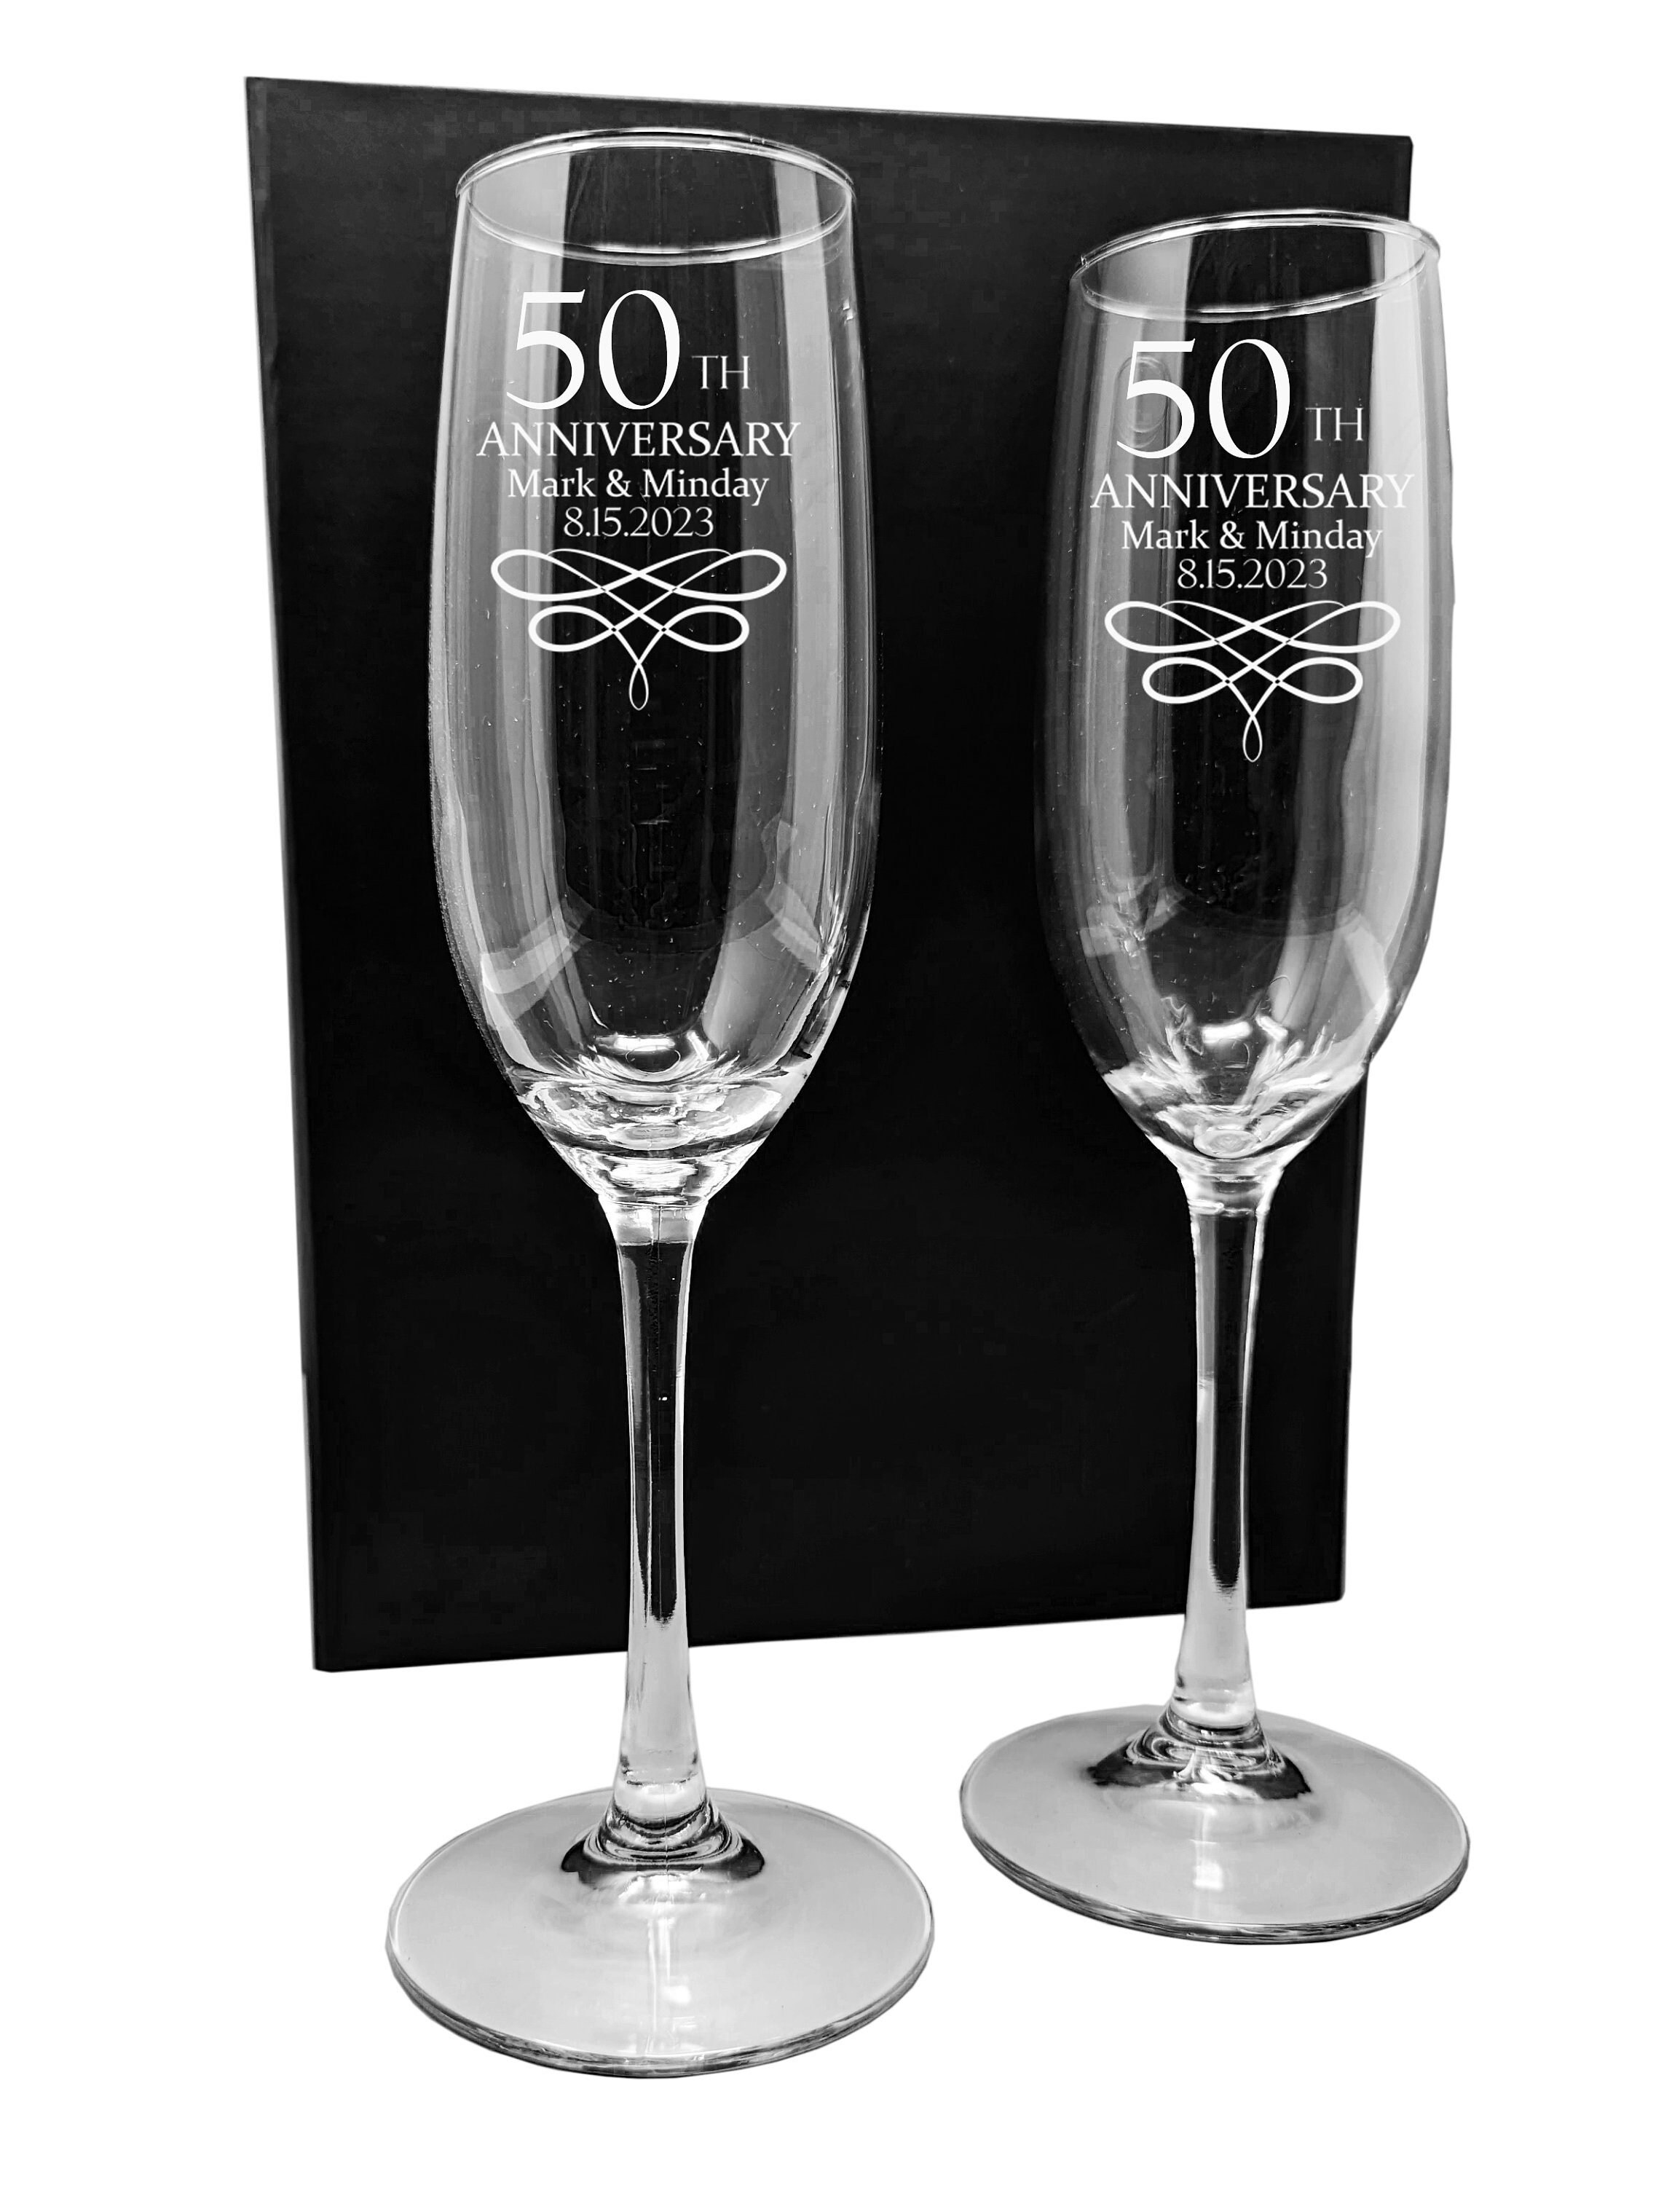 Wedding Gold Metallic Dot Champagne Flutes Hand Painted for 50th Anniversary Set of 2 